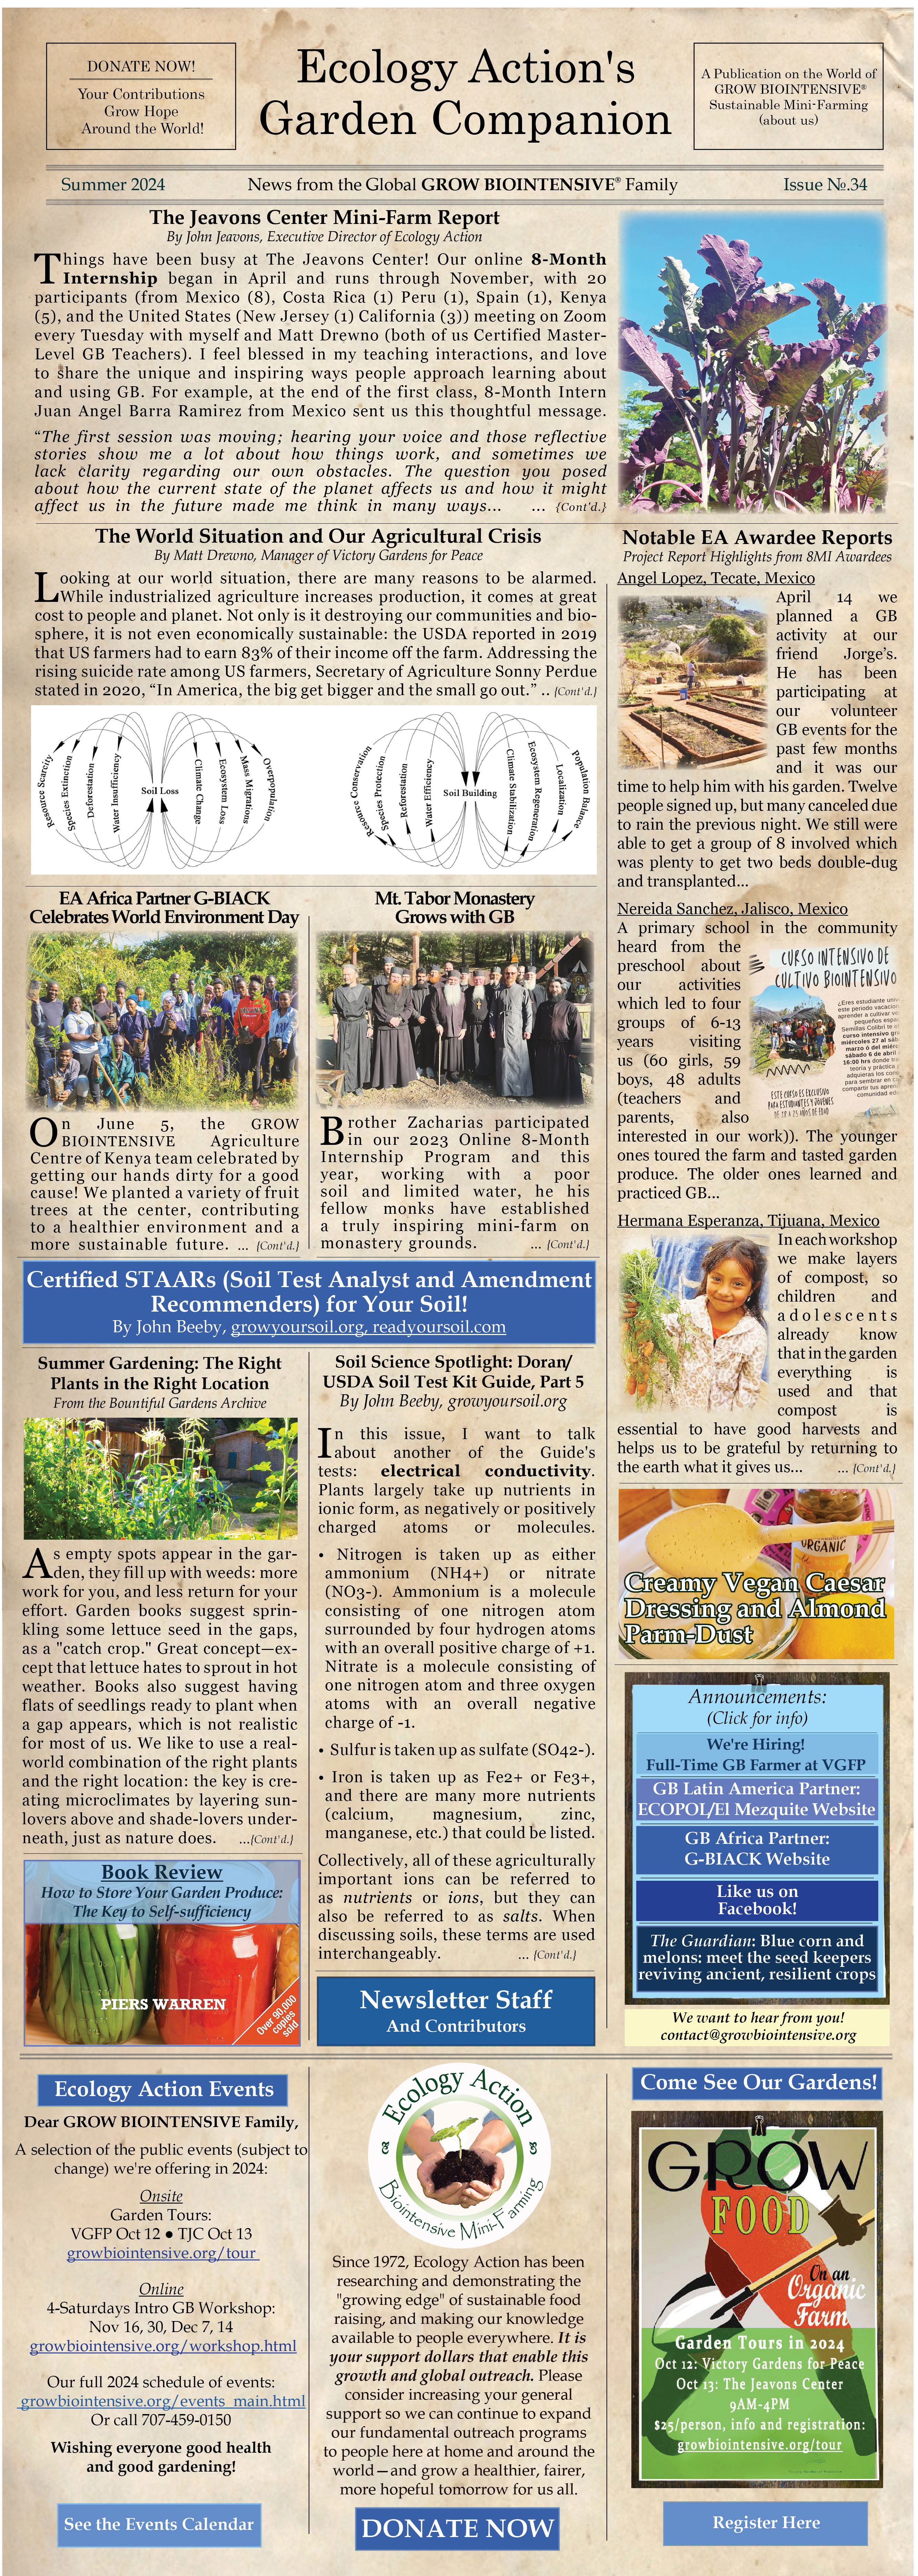 Ecology Action - The Garden Companion Newsletter Summer 2024 
Ecology Action is a 501(c)(3) non-profit organization and has been teaching people worldwide to better feed themselves while building the soil and conserving resources since 1971. 
Victory Gardens for Peace is a project of Ecology Action.
This is the 33rd edition of our e-newsletter and we hope you like it!
Read it online at http://www.growbiointensive.org/Enewsletter
___________________________________________
Articles in this issue:
The Jeavons Center Mini-Farm Report
Read the article at http://growbiointensive.org/Enewsletter/Summer2024/tjc.html  

Victory Gardens for Peace: The World Situation and Our Agricultural Crisis
Read the article at http://www.growbiointensive.org/Enewsletter/Summer2024/vgfp.html 

Certified STAARS (Soil Test Analyst and Amendment Recommenders)
Read the article at http://www.growbiointensive.org/Enewsletter/Summer2024/staars.html 

Mt. Tabor Monastery Grows with GB
Read the article at http://www.growbiointensive.org/Enewsletter/Summer/mttabor.html 

Soil Science Spotlight: The Dr. John Doran/USDA Soil Quality Test Kit Guide, Part 5
Read the article at http://www.growbiointensive.org/Enewsletter/Summer2024/soilscience.html 

Recipe: Creamy Vegan Caesar Dressing and Almond Parm-Dust
http://www.growbiointensive.org/Enewsletter/Summer2024/recipe.html  

EA Africa Partner G-BIACK Celebrates World Environment Day
Read the article at http://www.growbiointensive.org/Enewsletter/Summer2024/gbiack.html 

The Guardian: Blue corn and melons: meet the seed keepers reviving ancient, resilient crops
Read the article at https://www.theguardian.com/environment/2022/apr/18/seed-keeper-indigenous-farming-acoma      

Notable EA 2023-24 Awardee Reports: Angel Lopez, Nereida Sanchez & Hermana Esperanza
Read the article at http://growbiointensive.org/Enewsletter/Summer2024/ awardeereports.html   

Book Review: How to Store Your Garden Produce: The Key to Self-Sufficiency
Read the article at http://growbiointensive.org/Enewsletter/Summer2024/bookreview.html   

Bountiful Gardens Archive - Summer Gardening: The Right Plants in the Right Location
Read the article at http://growbiointensive.org/Enewsletter/Spring2024/transplants.html     

Ecology Action Calendar of Events
Read the article at http://www.growbiointensive.org/events_main.html 

FAQ - Your Biointensive Questions Answered
http://growbiointensive.org/FAQ 

Like us on Facebook!
Read the article at https://www.facebook.com/EcologyActionoftheMidPenninsula/

Onsite Garden Tours at VGFP (May and October) and TJC (July): http://www.growbiointensive.org/tour

Donate to Ecology Action! https://donatenow.networkforgood.org/ecologyaction

Download the PDF Version of this Newsletter 
http://www.growbiointensive.org/Enewsletter/Summer2024/ Summer2024_FINAL_CMYK.pdf     

About Ecology Action's Garden Companion 
Managing Writer/Editor and Art Director: Shannon Joyner
Contributors: John Jeavons, Matt Drewno, John Beeby, Mary Zellachild, Brother Zacharias, G-BIACK, Angel Lopez, Nereida Sanchez, Hermana Esperanza, The Guardian, Bountiful Gardens Archive, EA Staff,, and GROW BIOINTENSIVE® friends from around the world. ♥
